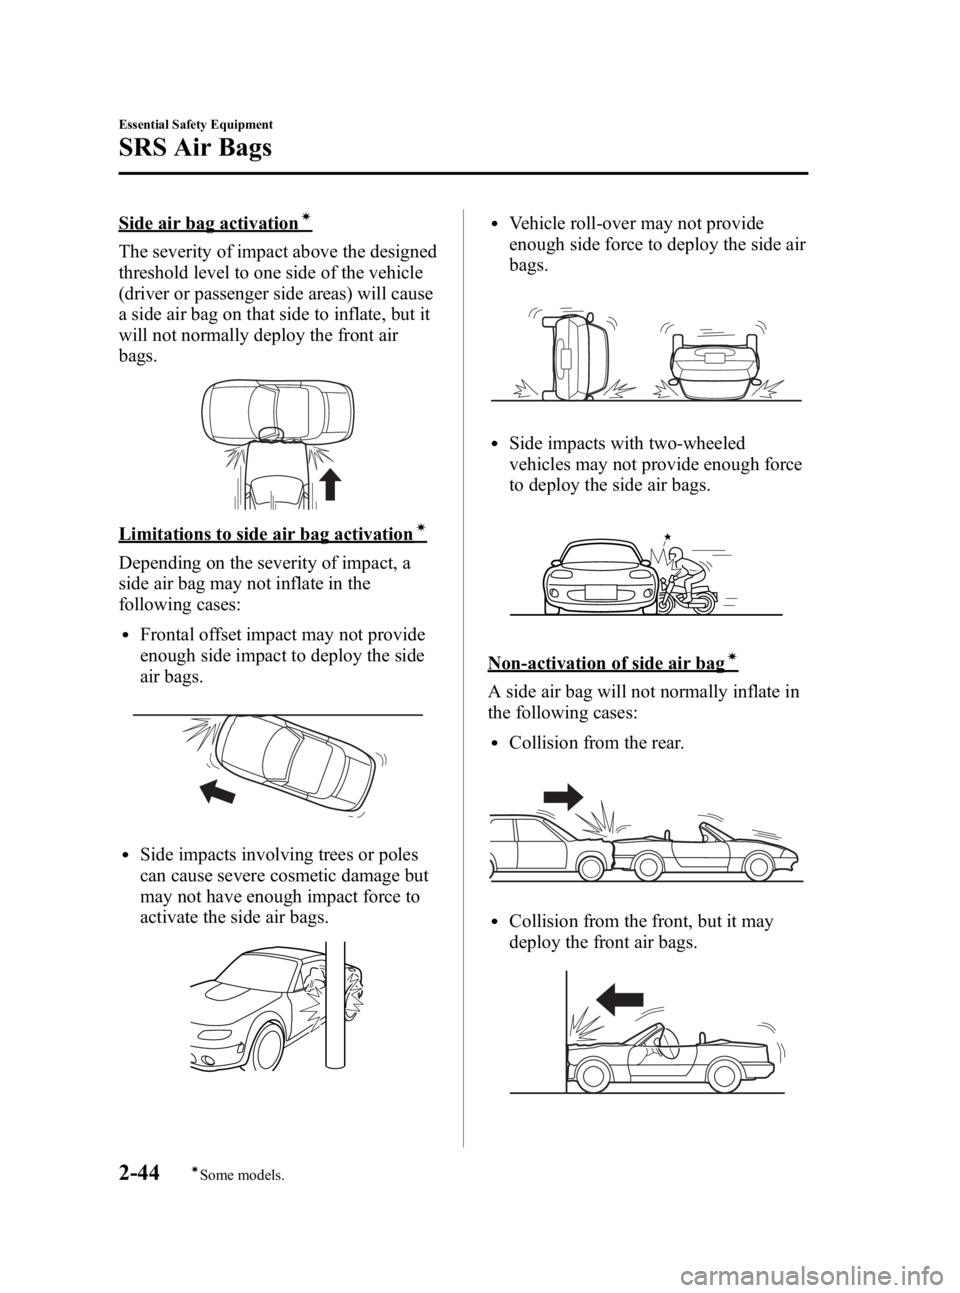 MAZDA MODEL MX-5 MIATA 2006  Owners Manual Black plate (56,1)
Side air bag activationí
The severity of impact above the designed
threshold level to one side of the vehicle
(driver or passenger side areas) will cause
a side air bag on that sid